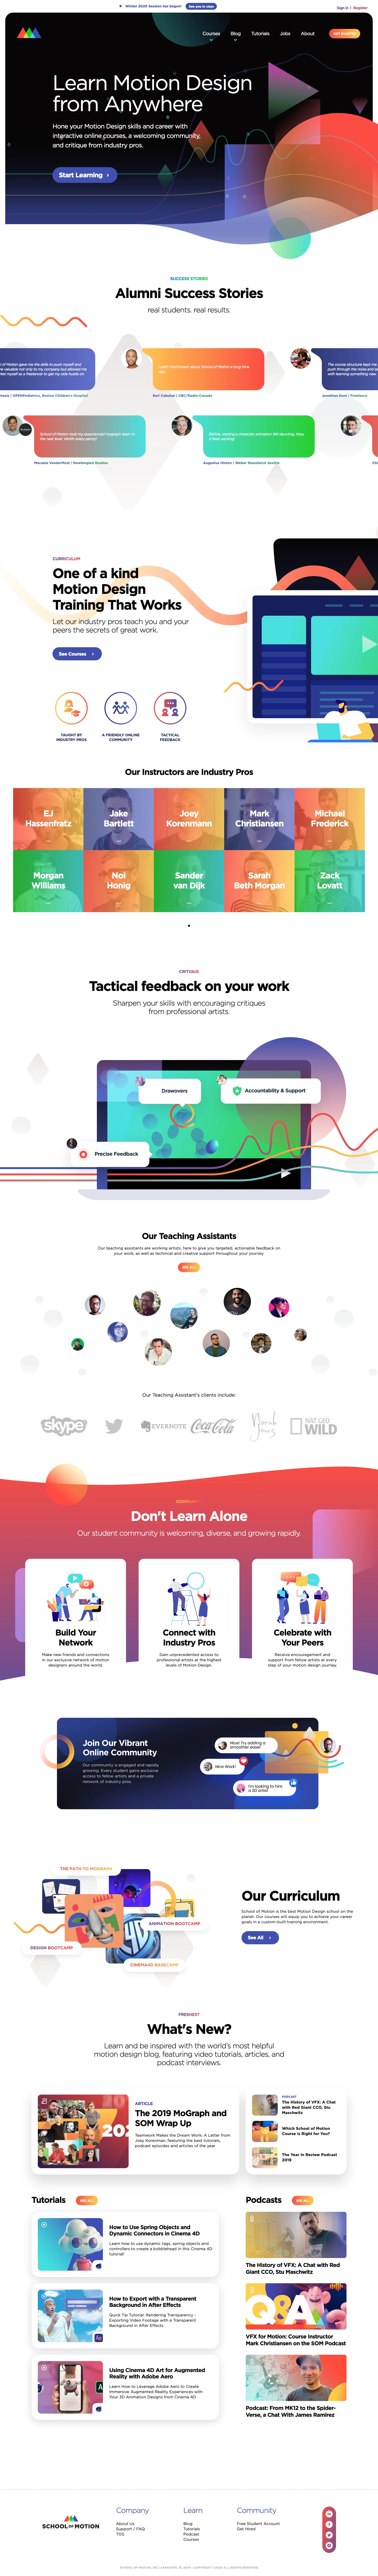 School of Motion Landing Page Example: Learn Motion Design from Anywhere. Hone your Motion Design skills and career with interactive online courses, a welcoming community, and critique from industry pros.